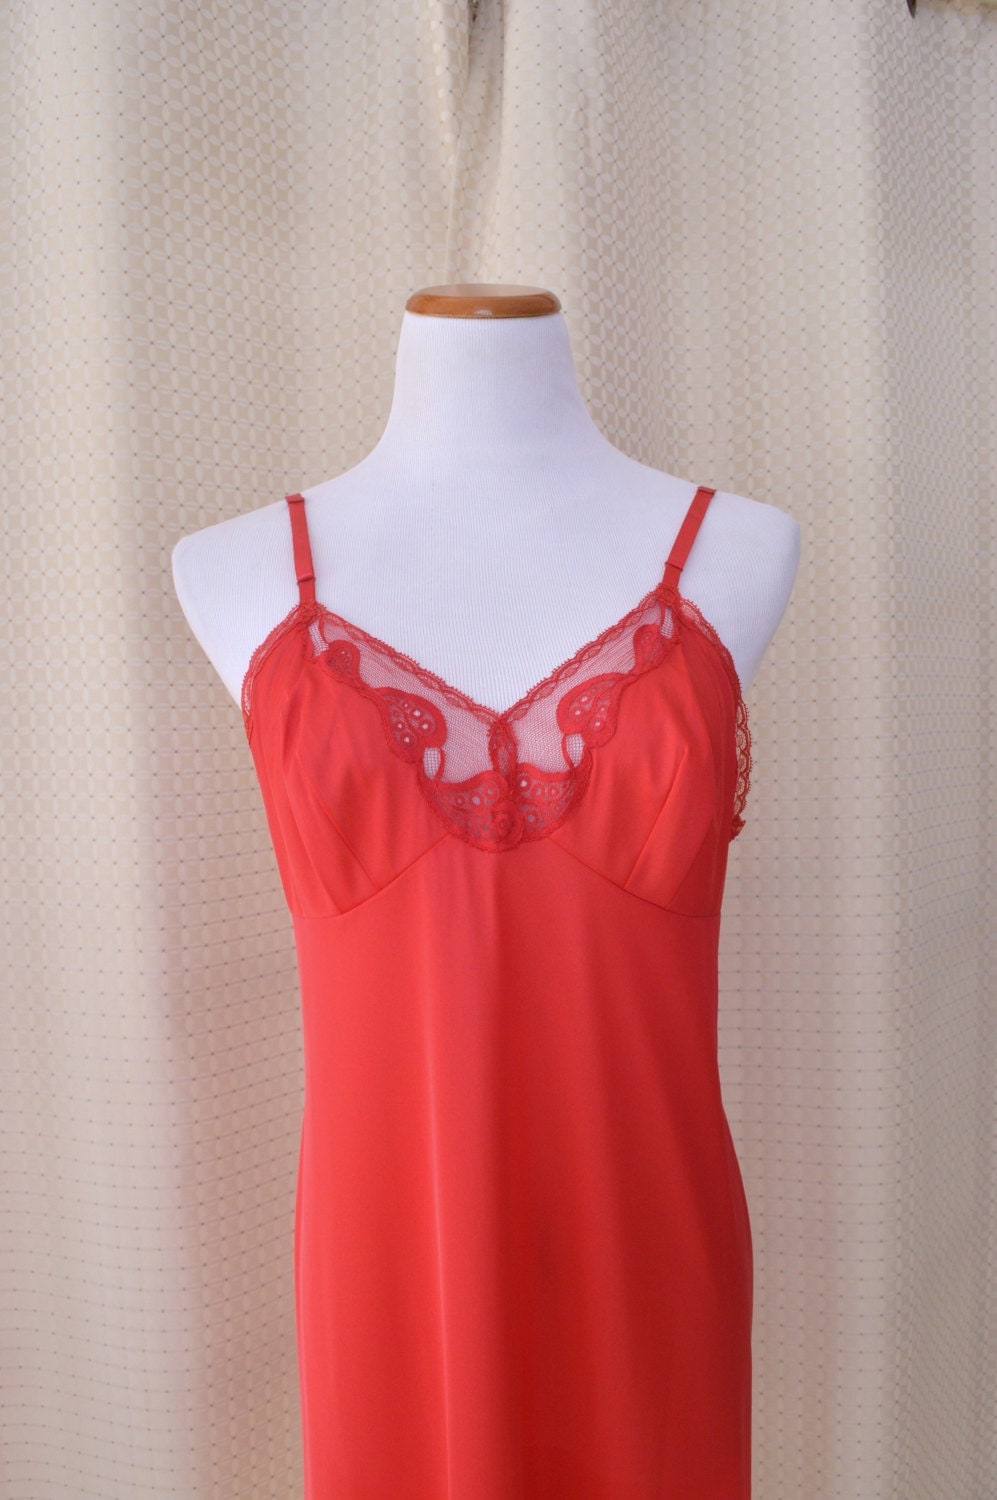 Womens Vanity Fair Very Red Full Slip Size 38 by HippieSoulVintage